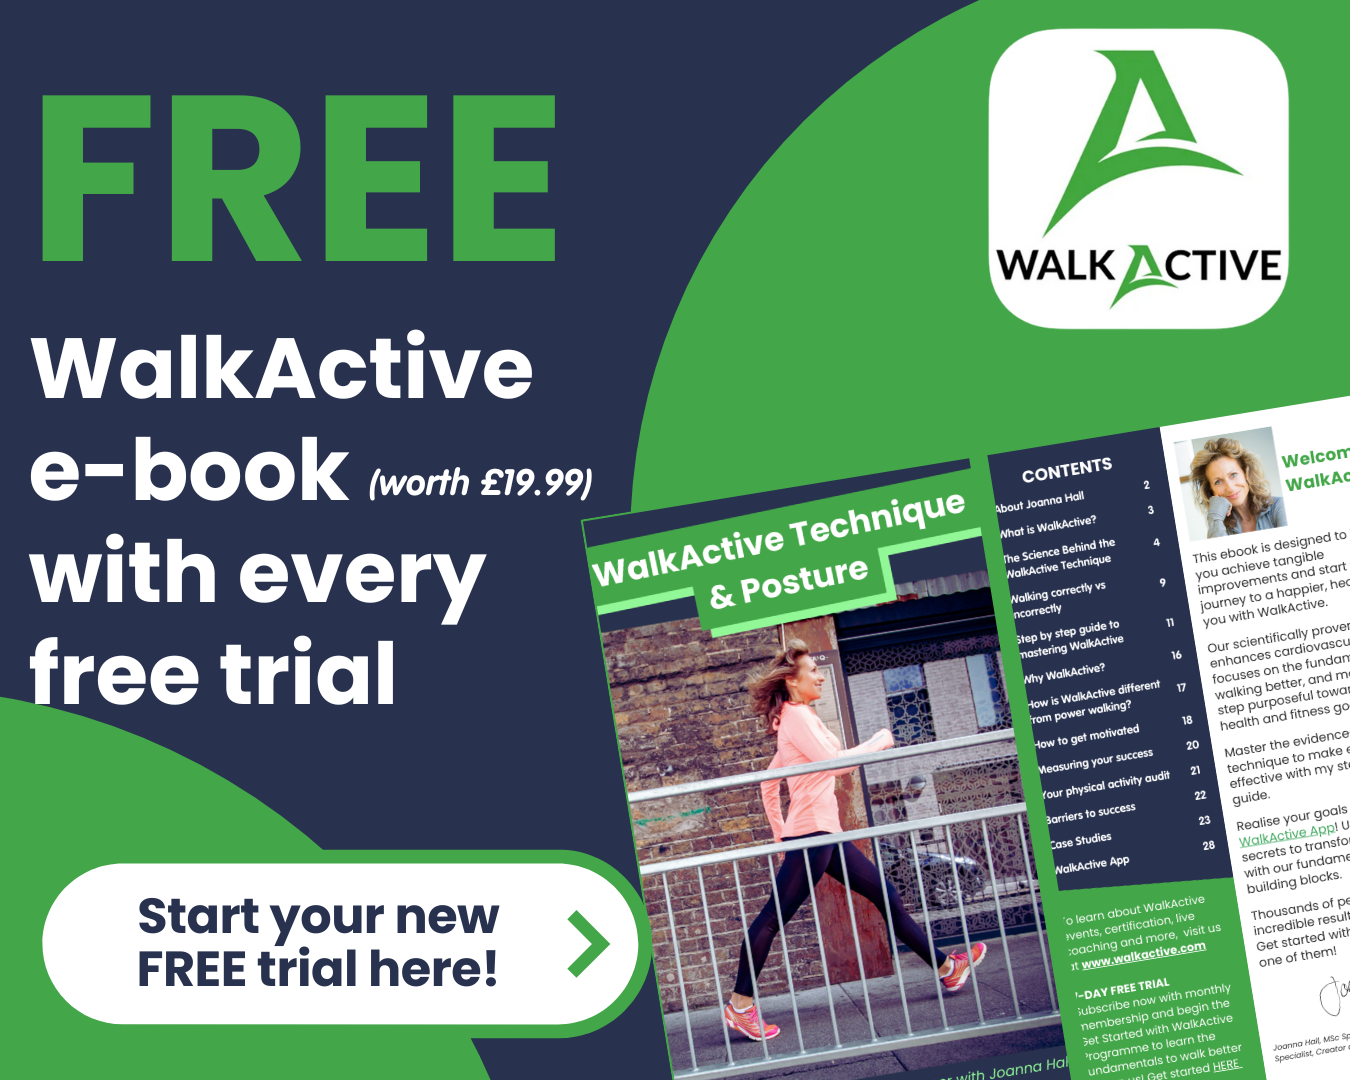 FREE WalkActive e-book with every free trial. Click to claim!